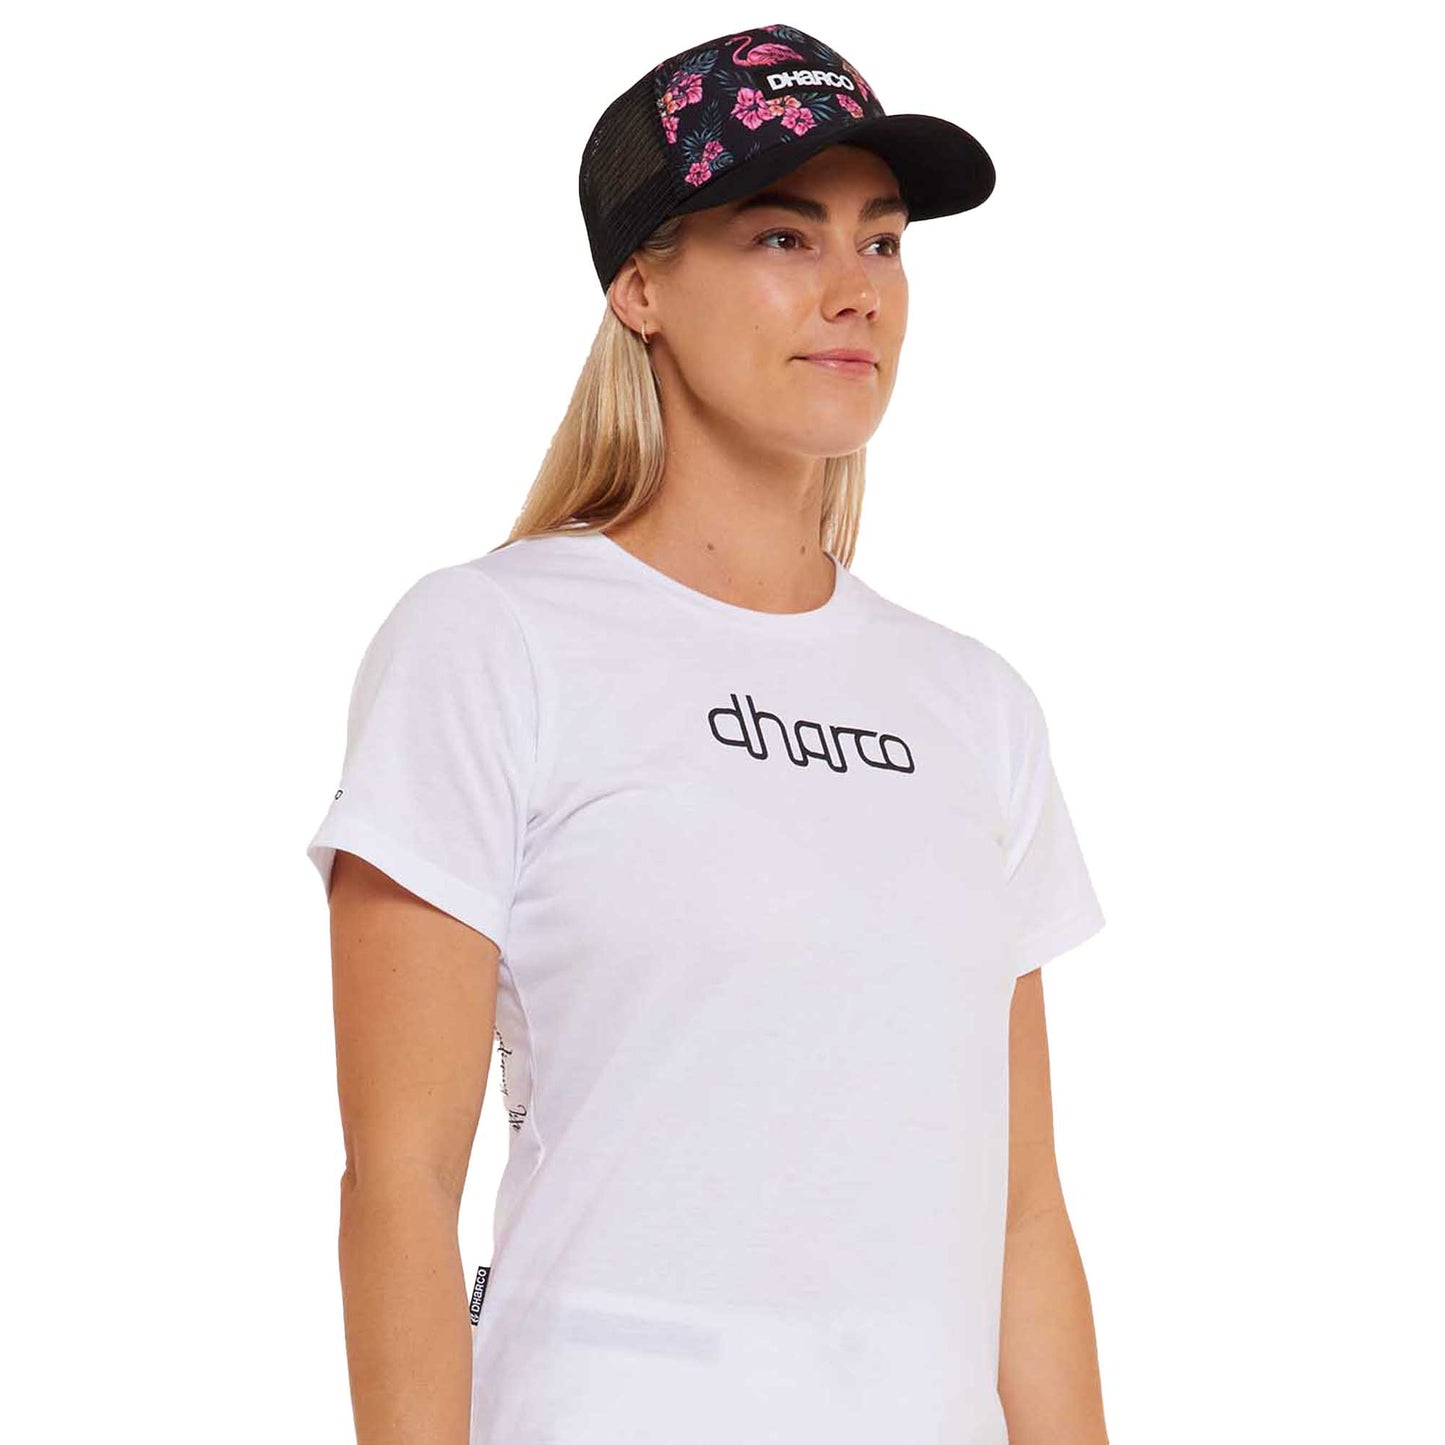 DHaRCO Curved Peak Trucker Hat - One Size Fits Most - Parker